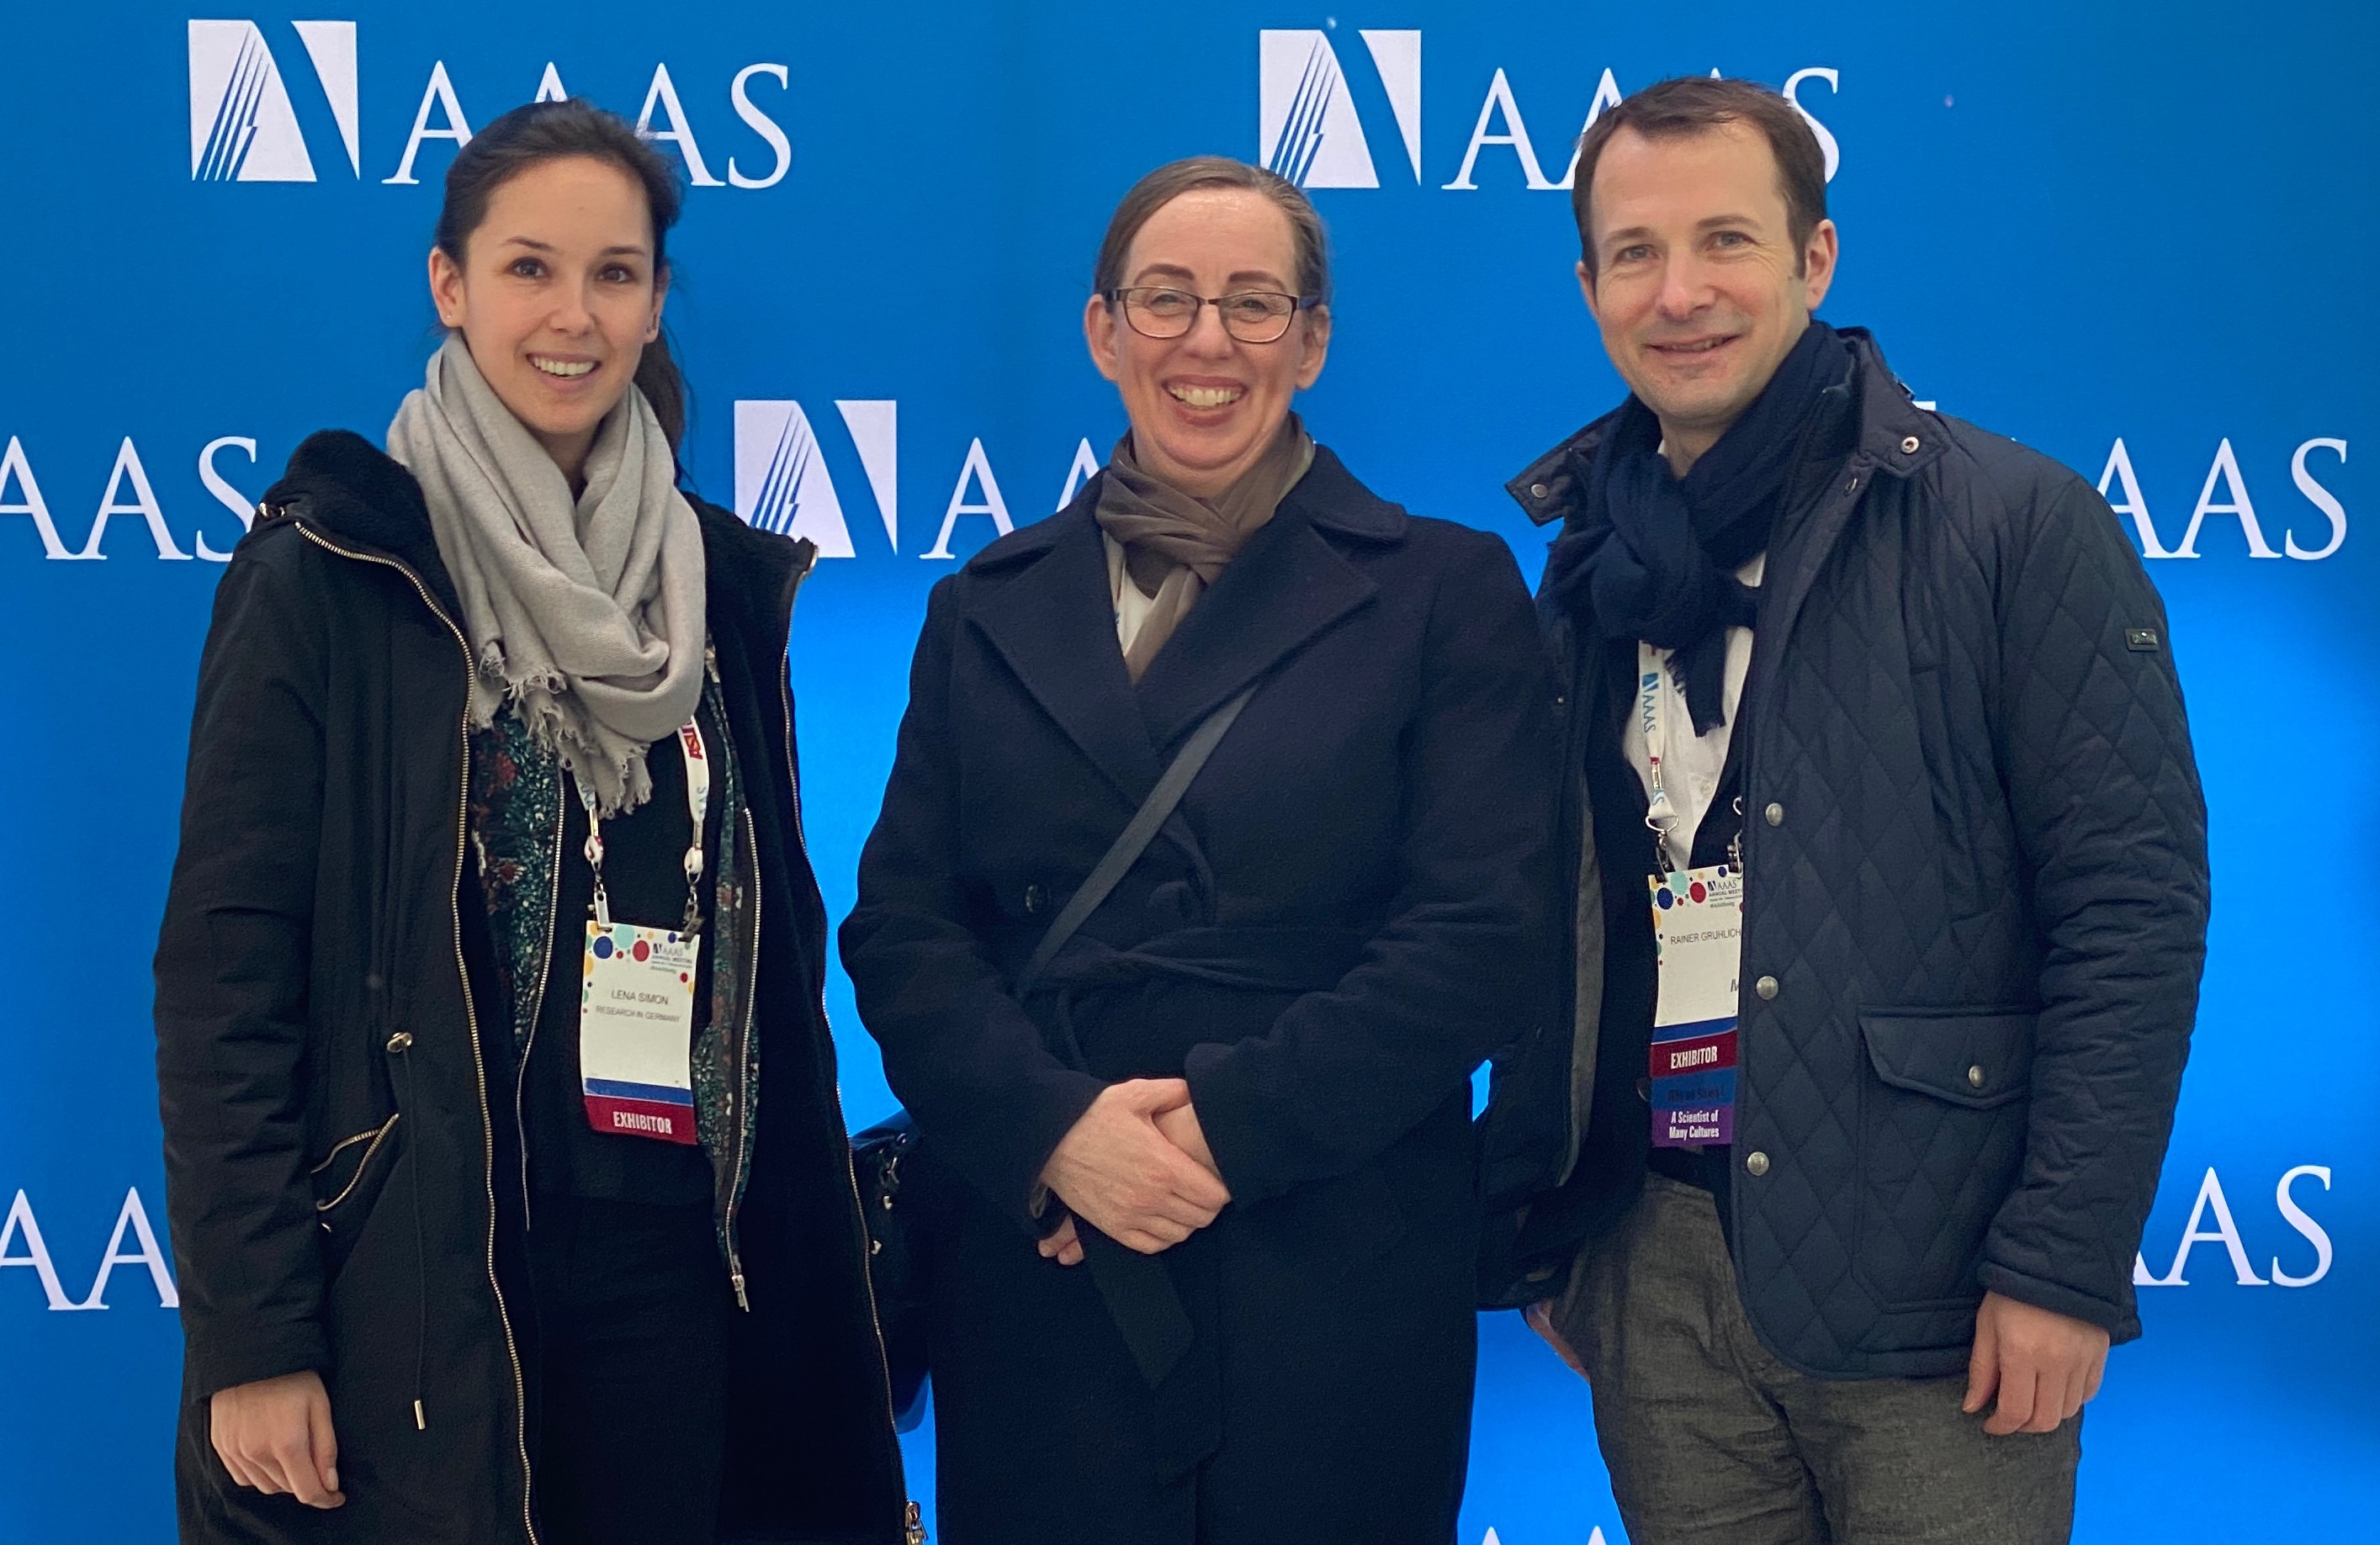 The DFG team at the AAAS: Lena Simon, Dr. Eickhoff and Dr. Gruhlich